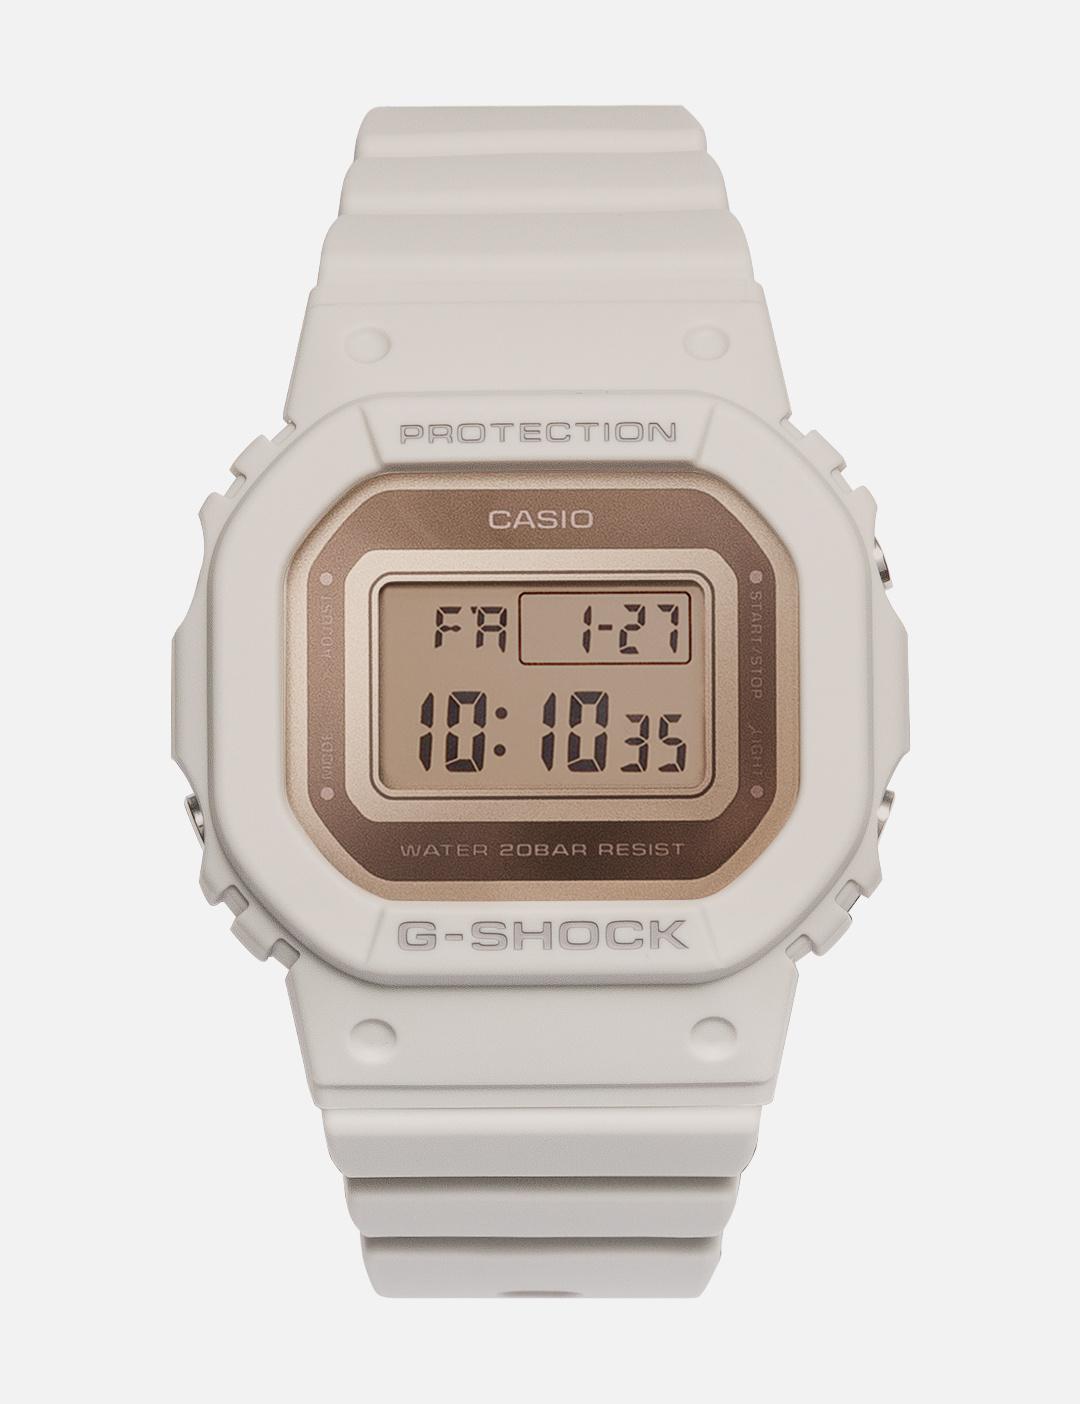 GMD-S5600-8 by CASIO